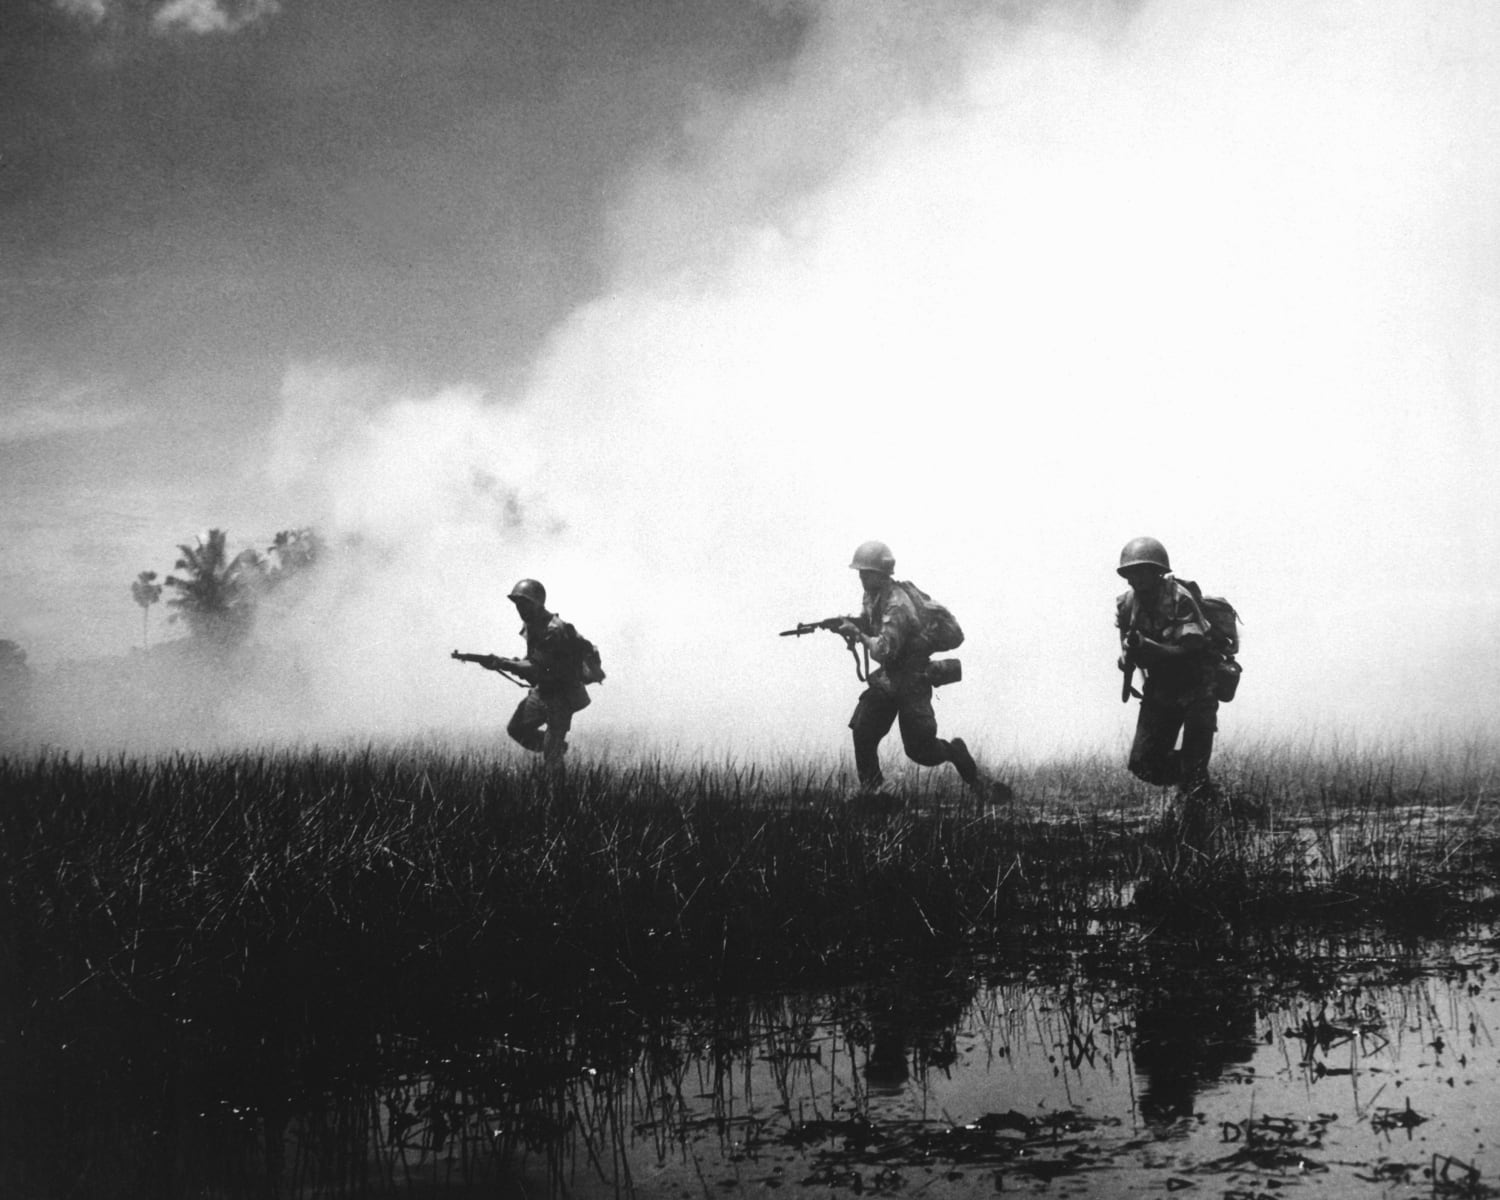 South-Vietnamese forces assault an enemy stronghold in the Mekong Delta, 1961.